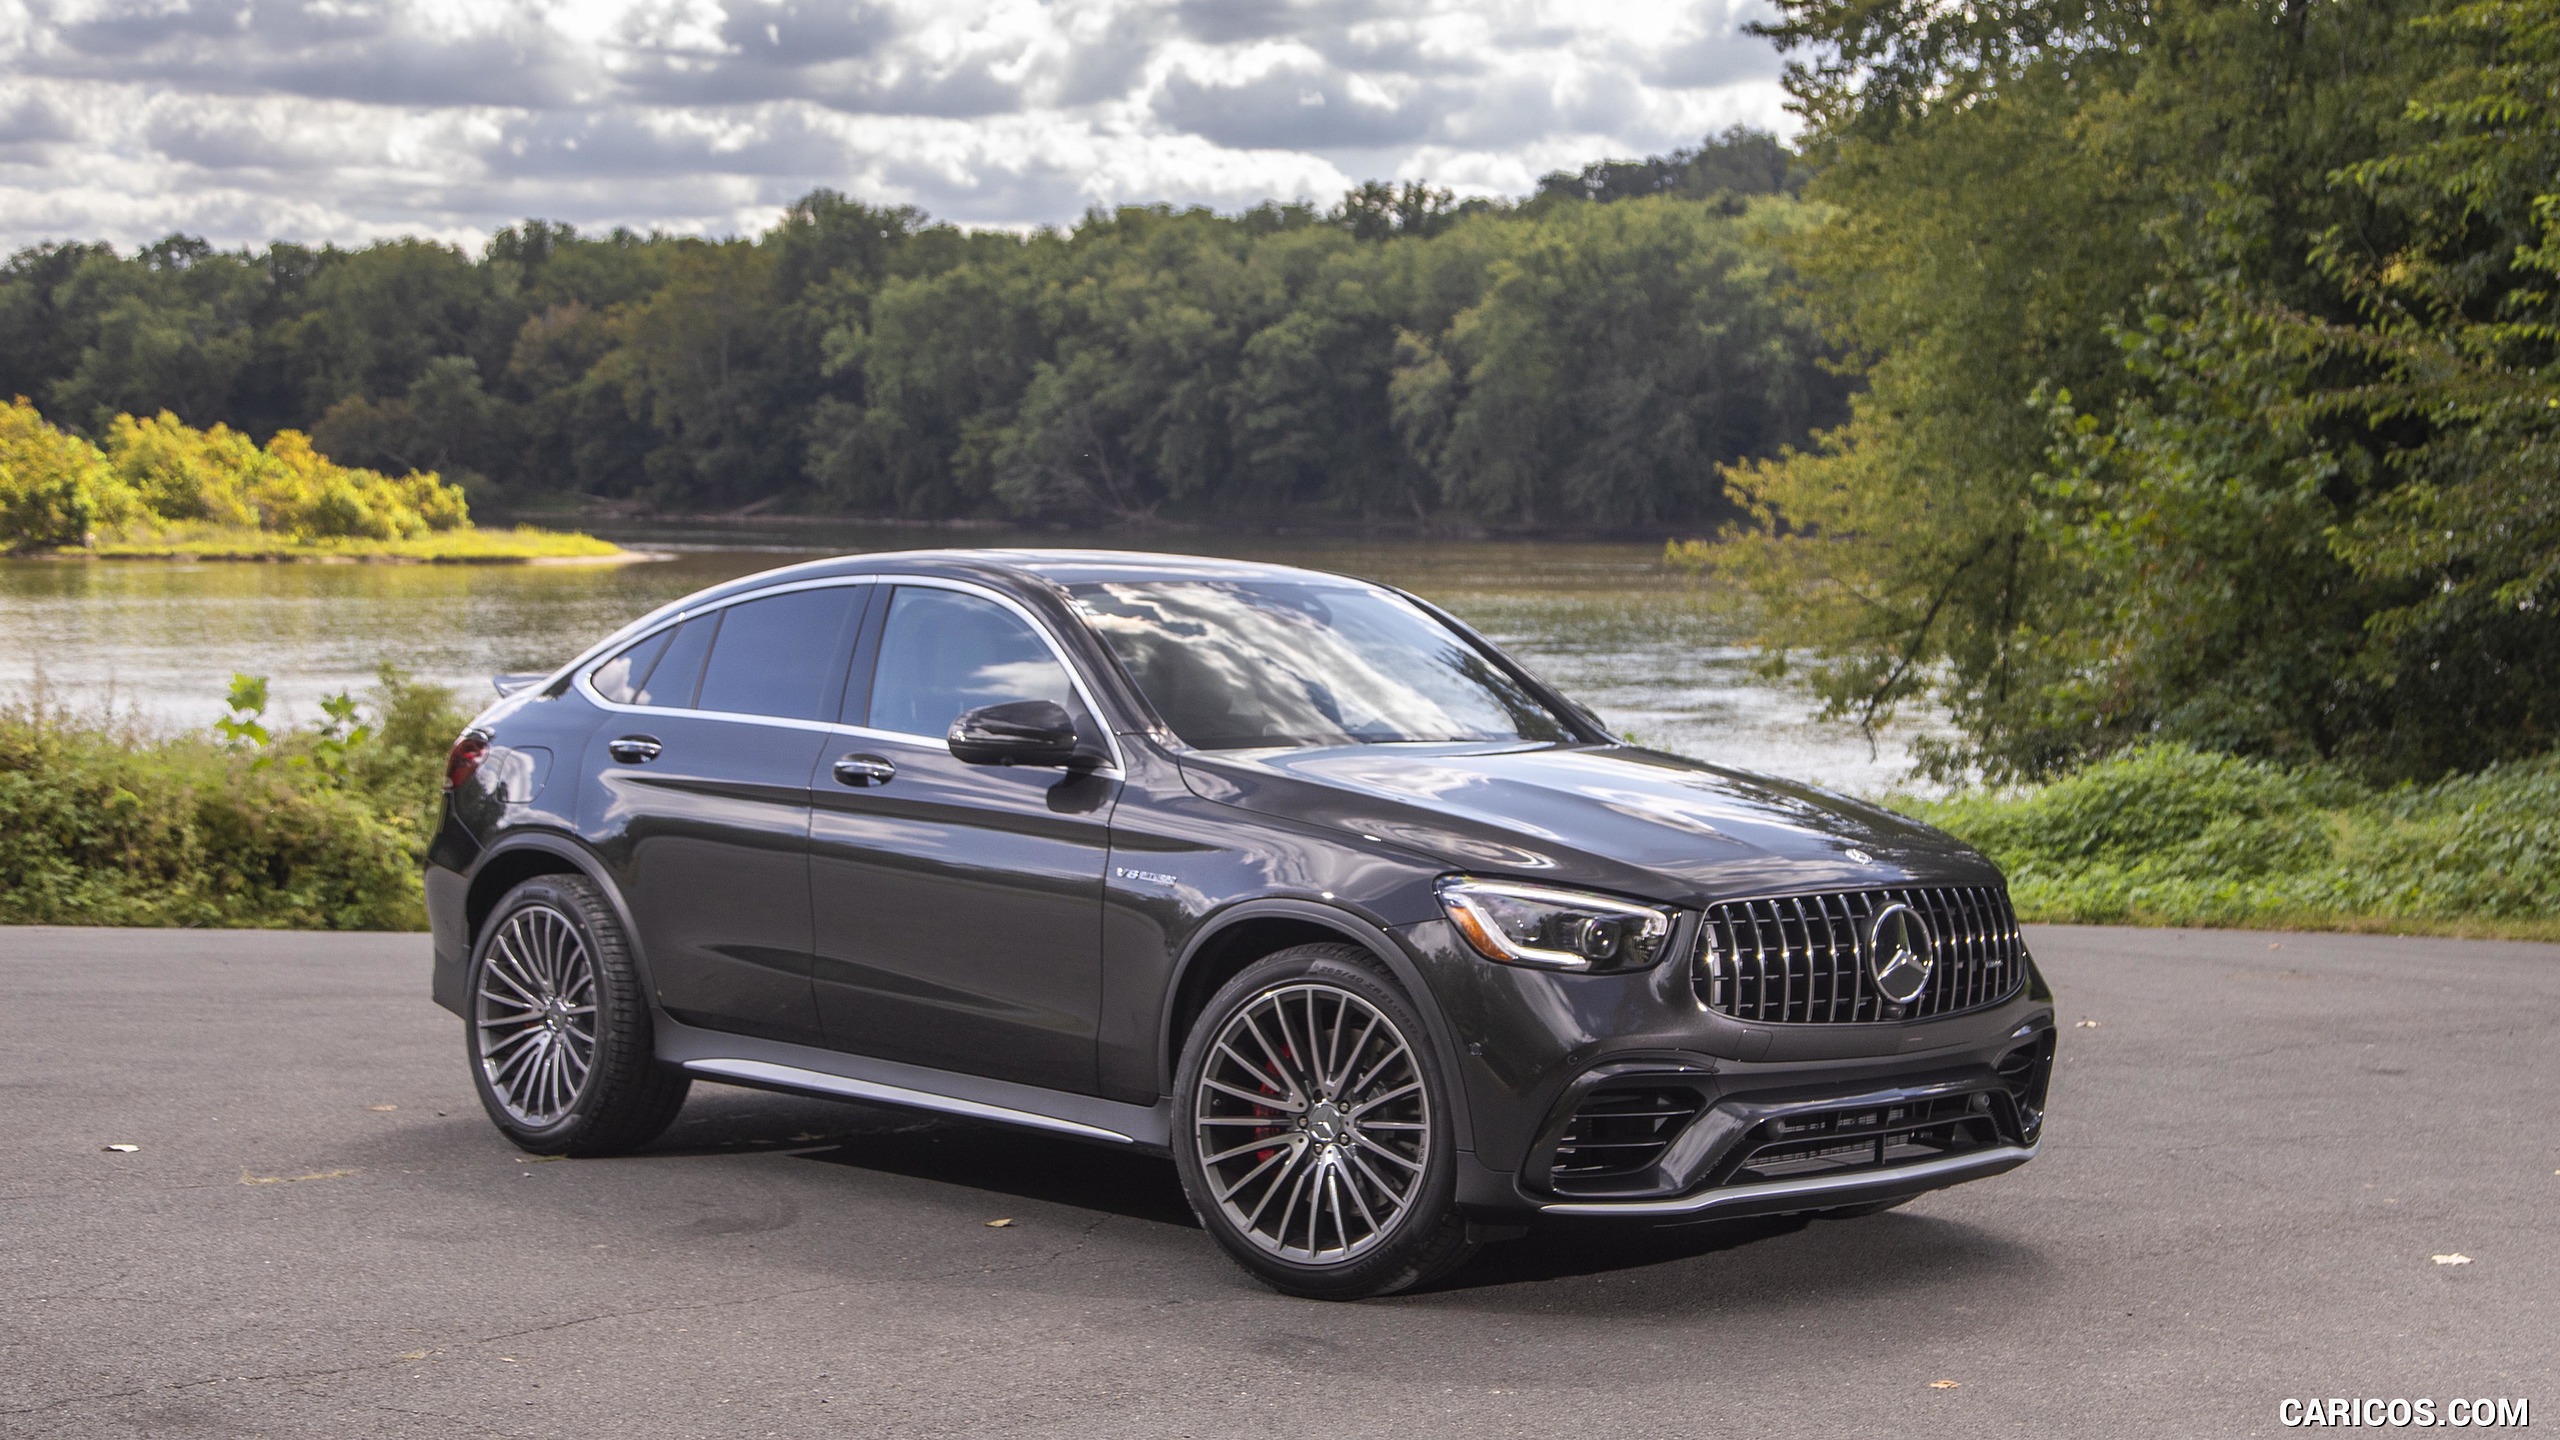 2020 Mercedes-AMG GLC 63 S Coupe (US-Spec) - Front Three-Quarter, #51 of 102